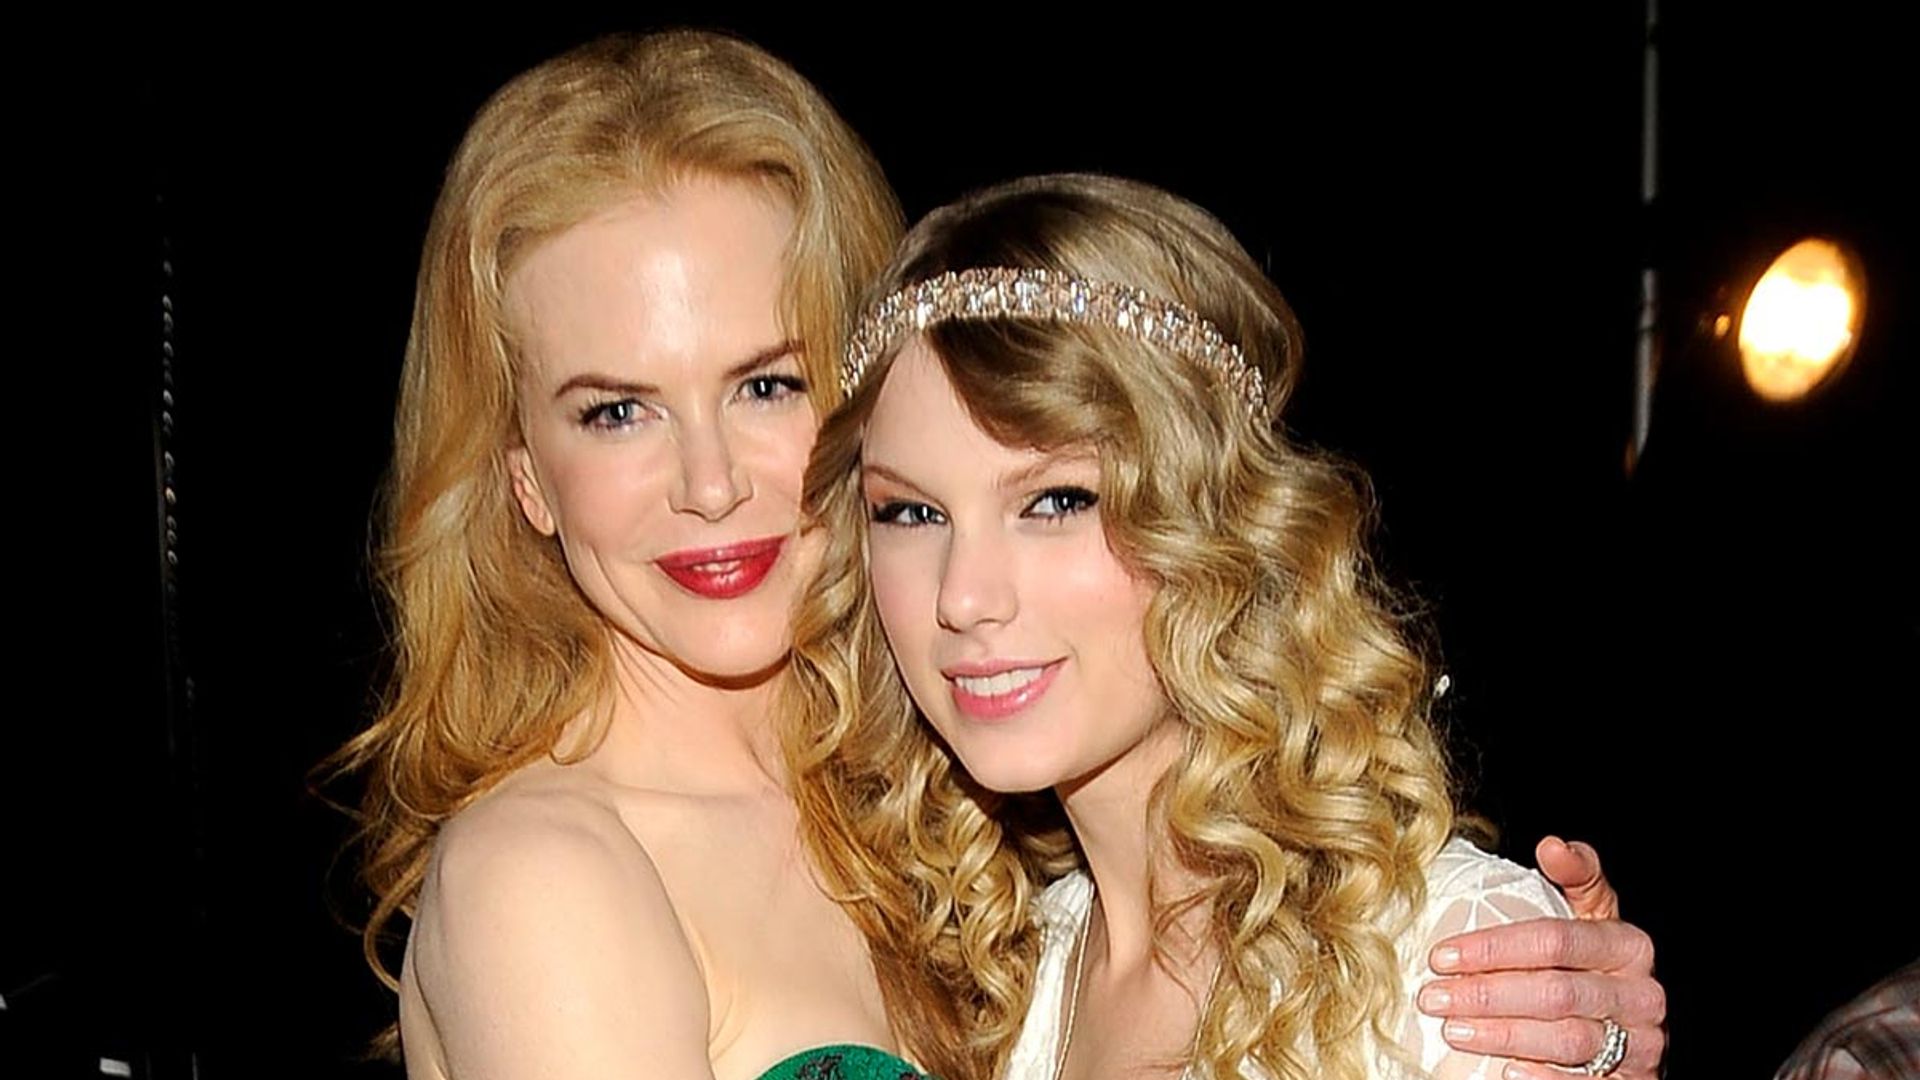 Nicole Kidman stuns Taylor Swift with her singing – see the sweet video